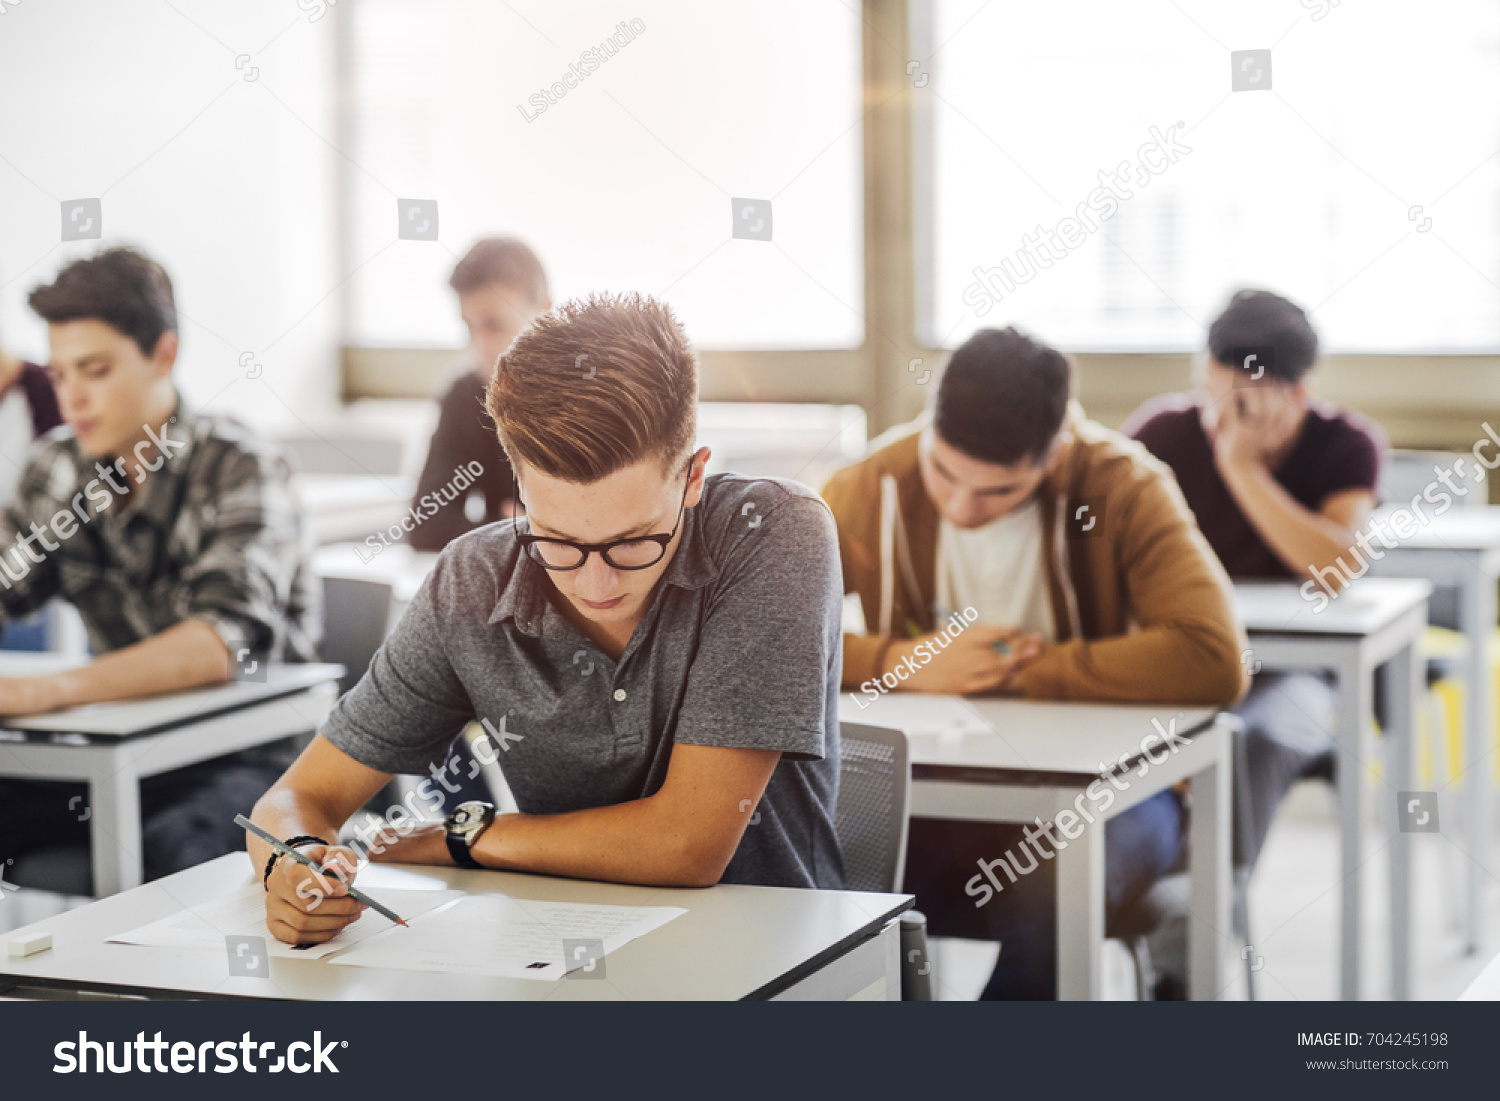 Group of high school students doing exam at classroom. #704245198